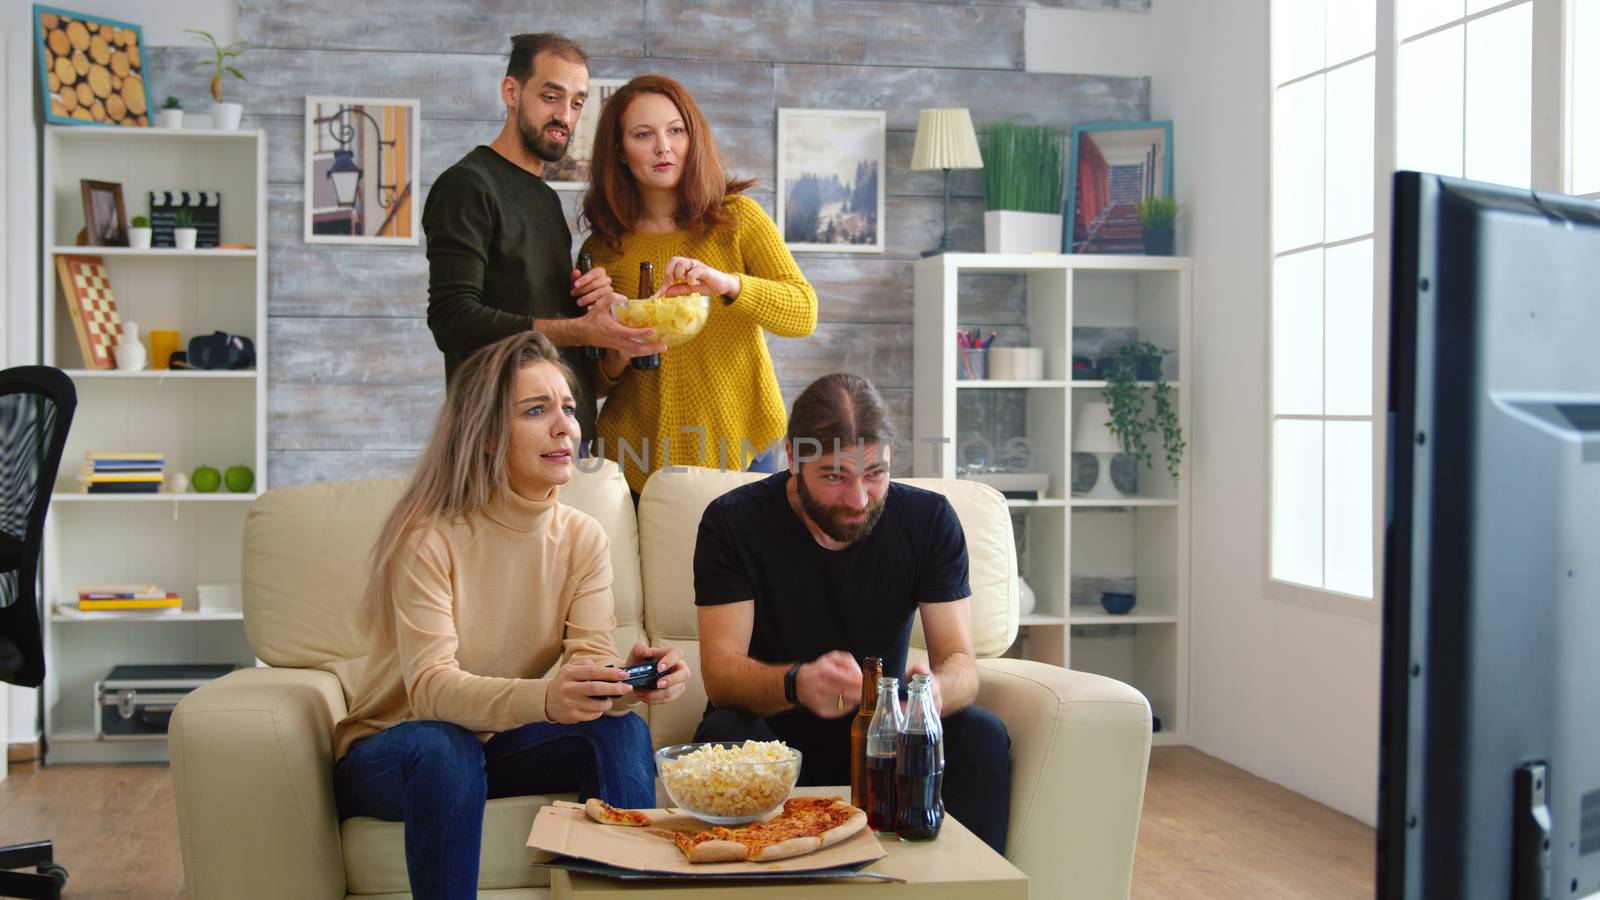 Cheerful caucasian friends playing video games on big tv in living room.